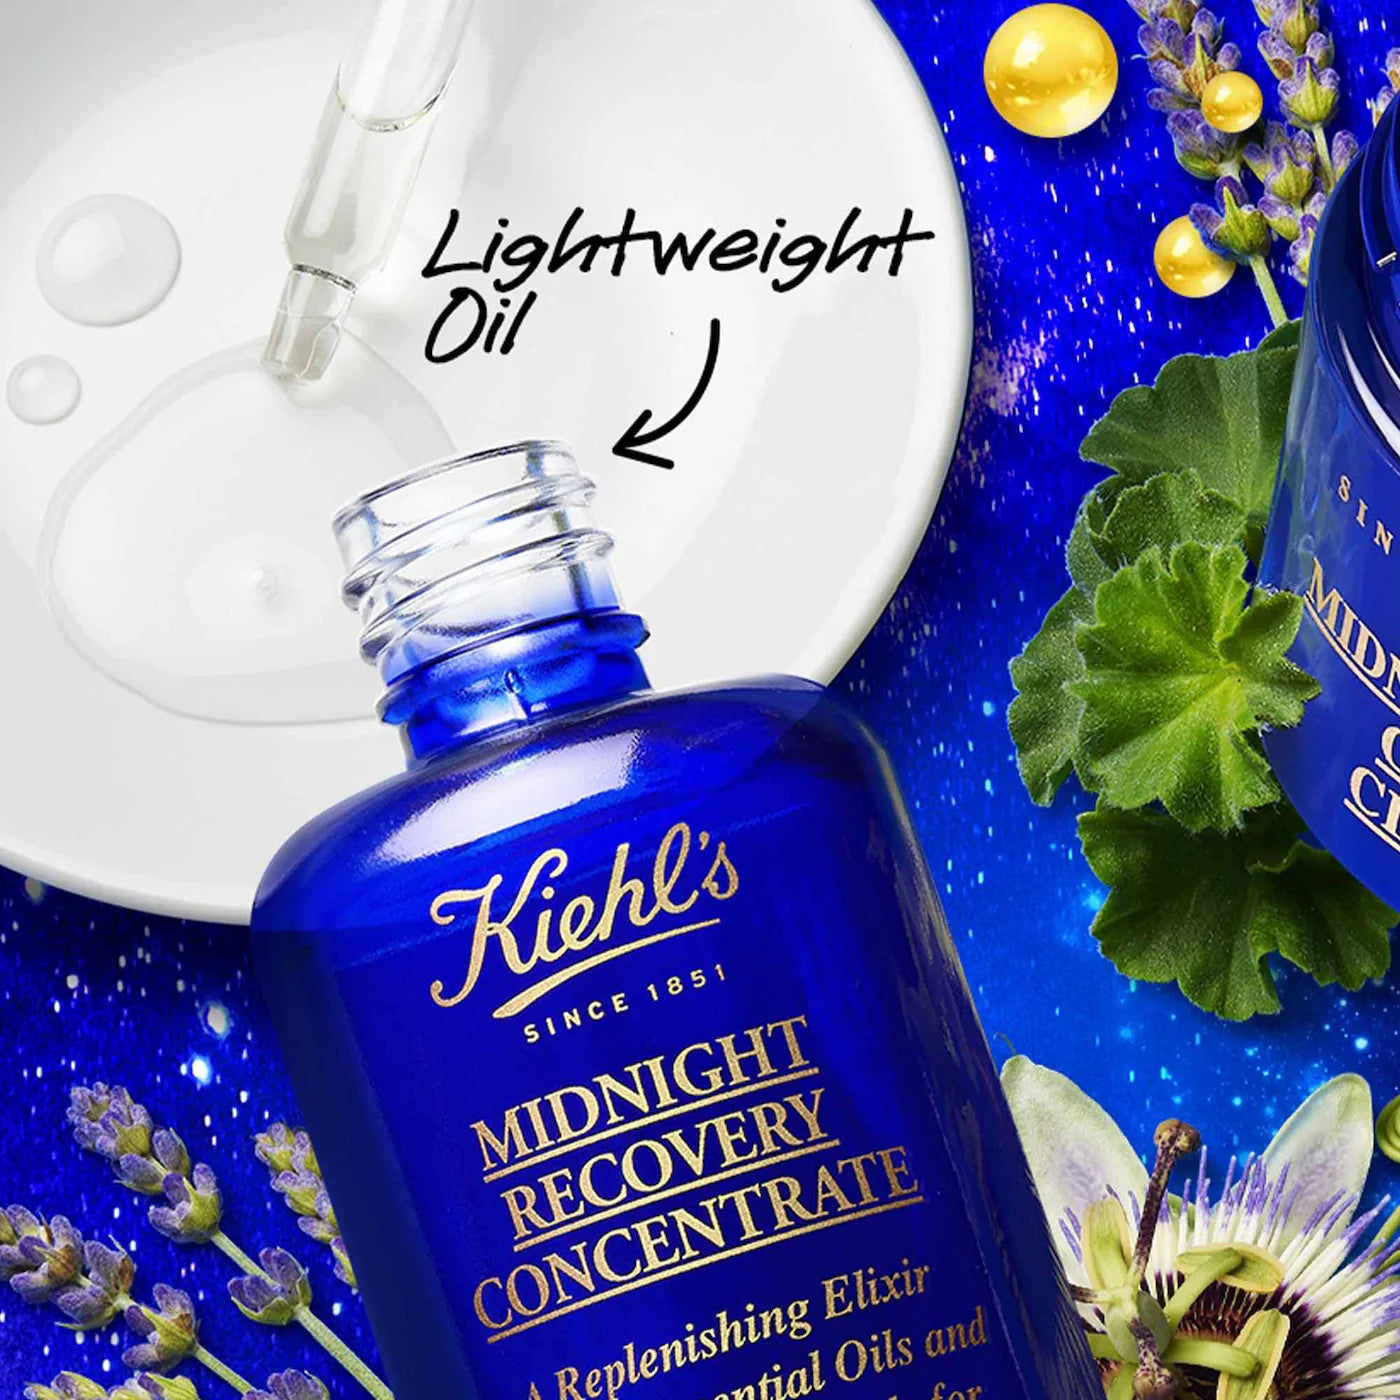 Kiehl's - Midnight Recovery Concentrate Moisturizing Face Oil | 30 mL